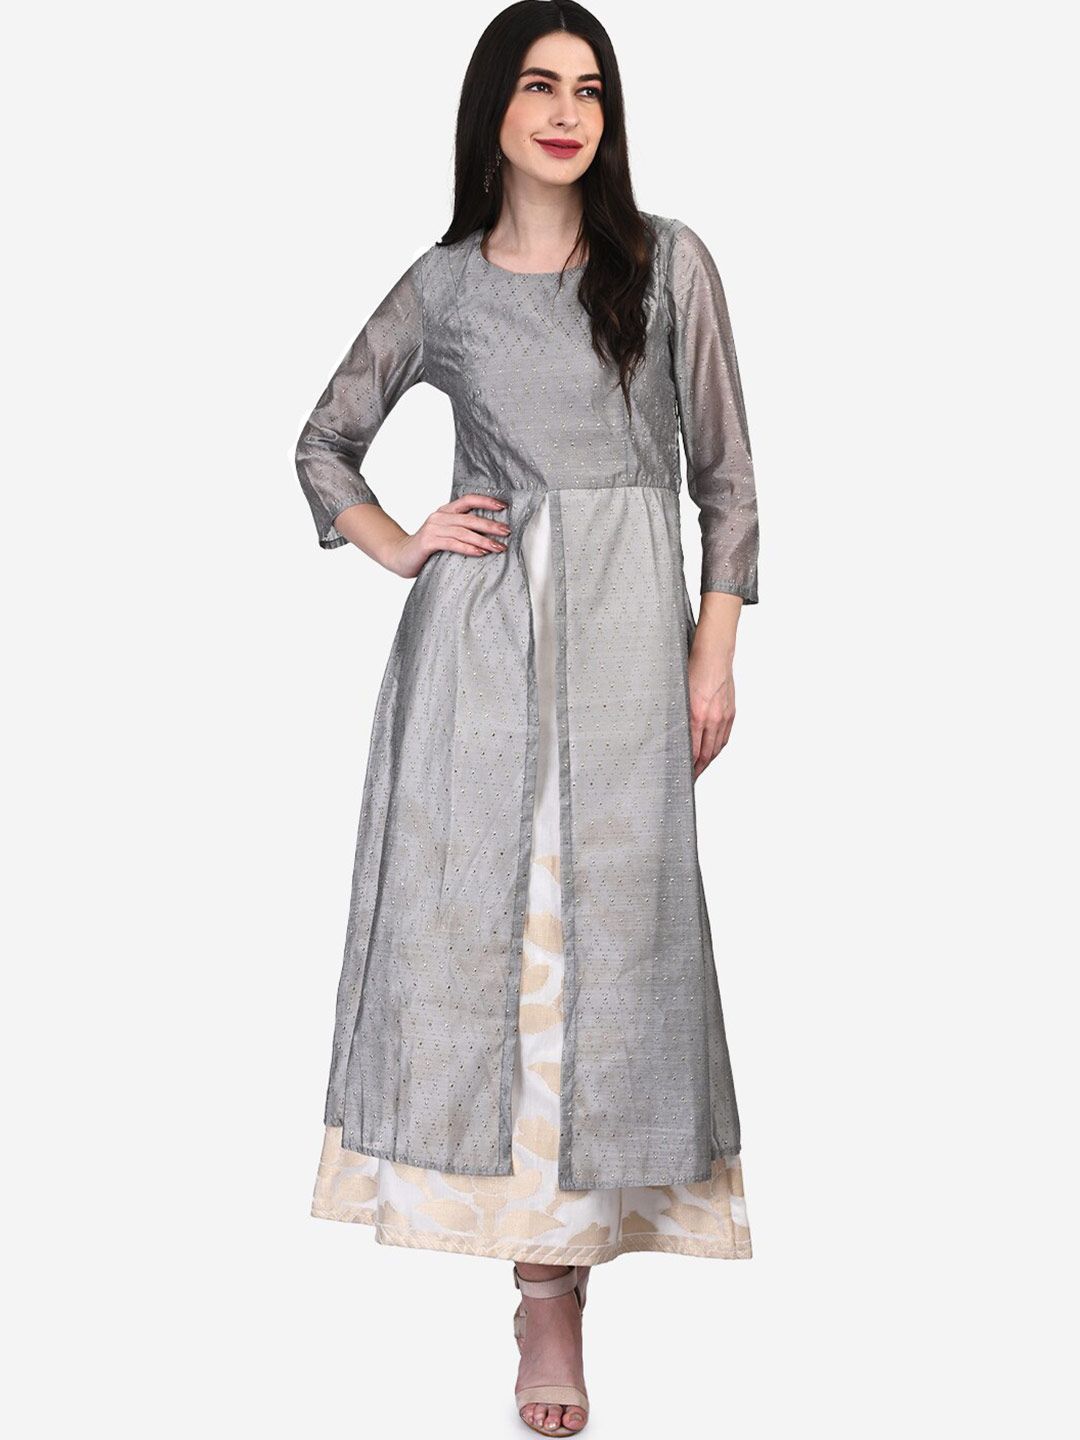 Be Indi Grey & White Floral Layered Ethnic Maxi Dress Price in India